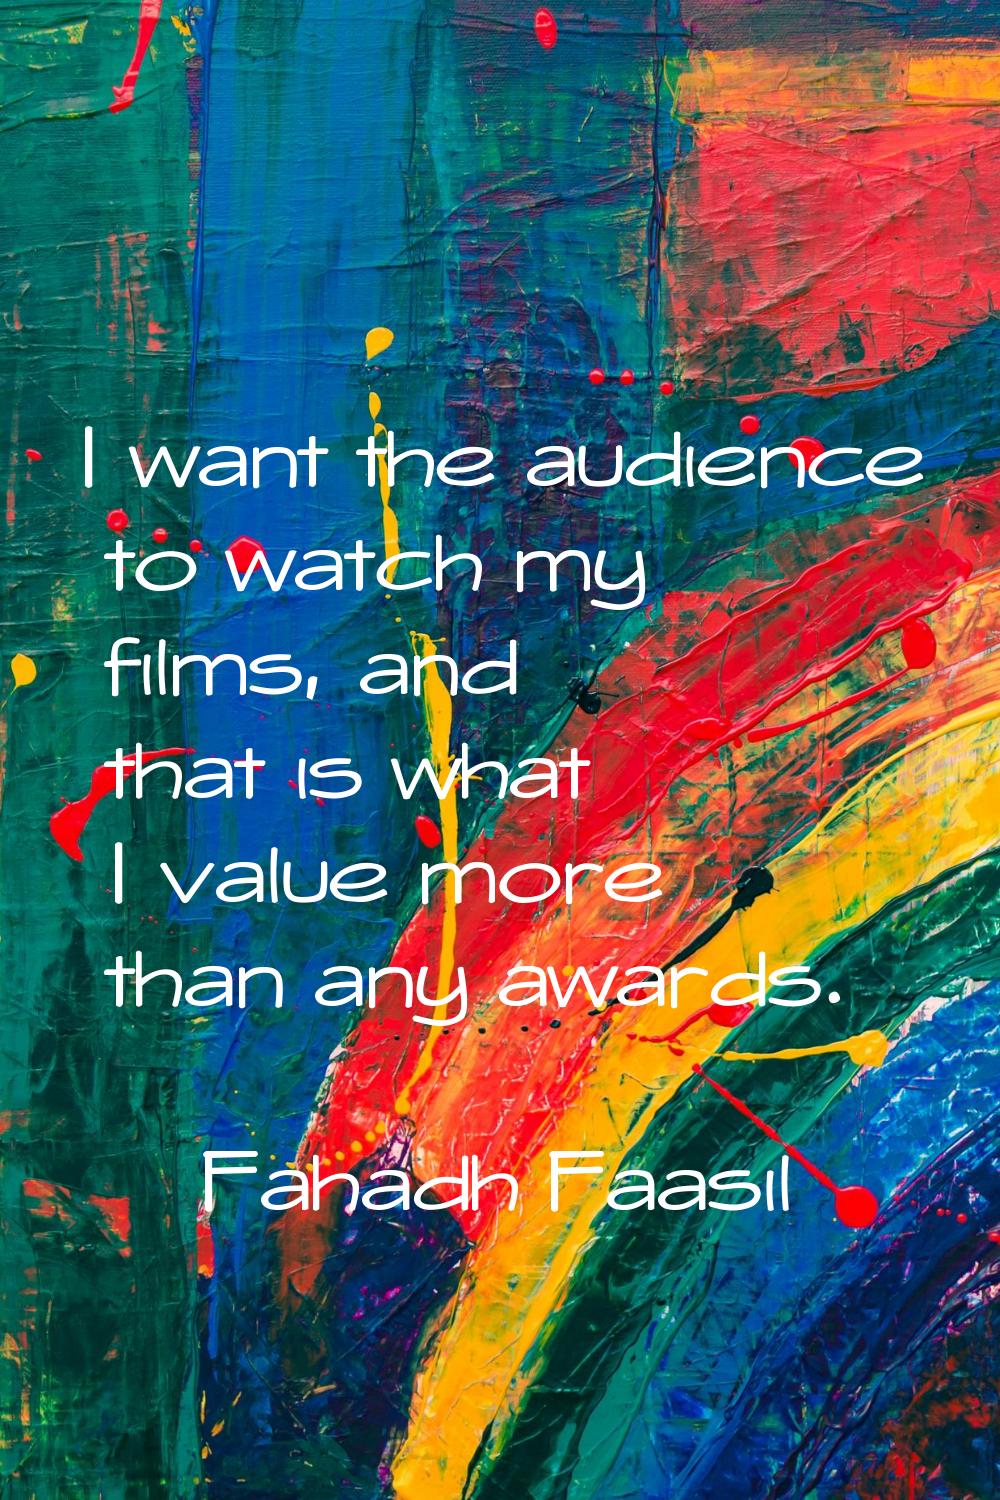 I want the audience to watch my films, and that is what I value more than any awards.